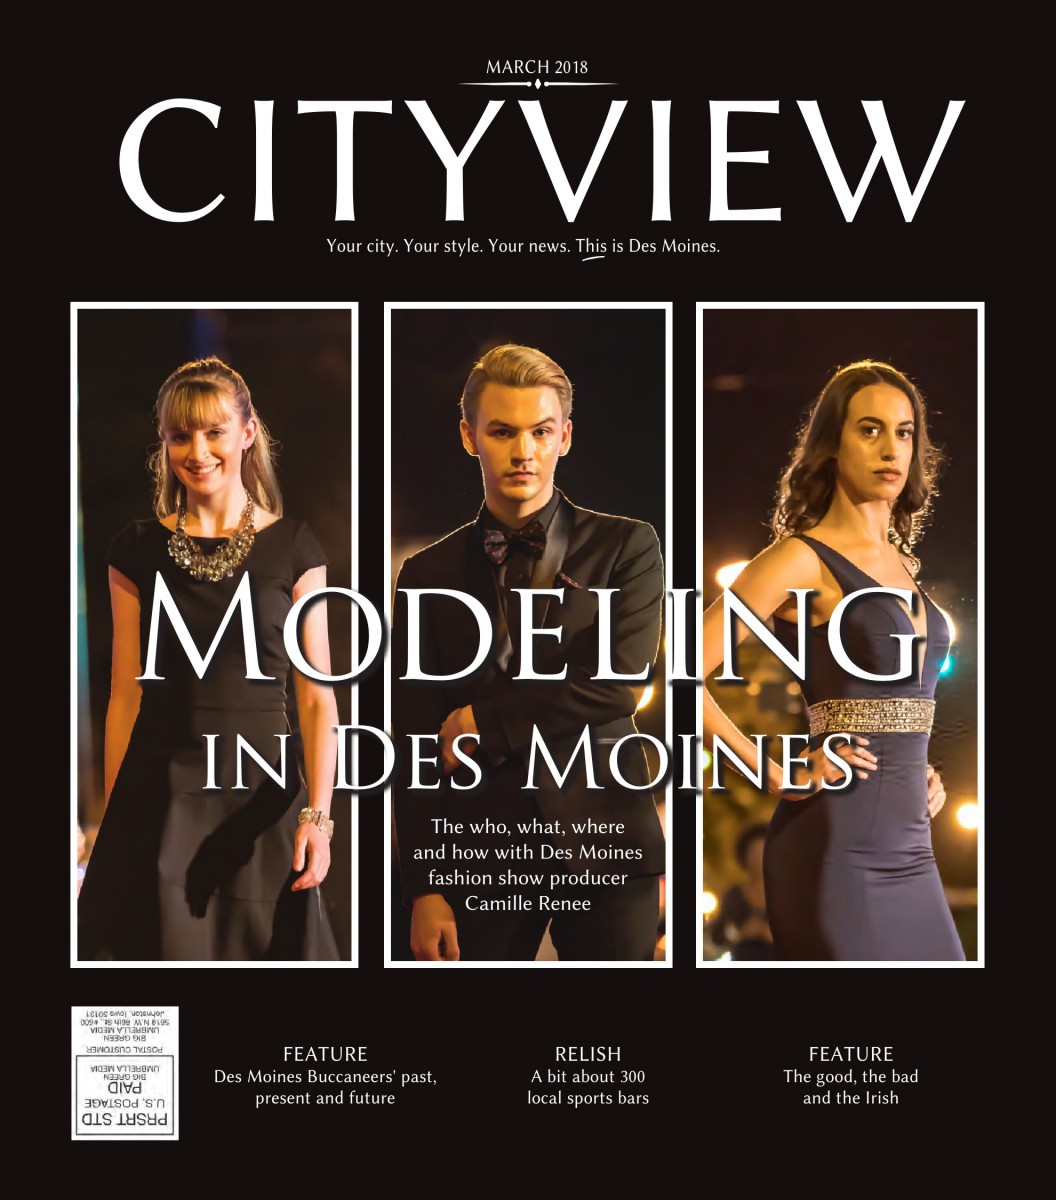 http://www.dmcityview.com/CityviewMarch2018/files/pages/tablet/1.jpg